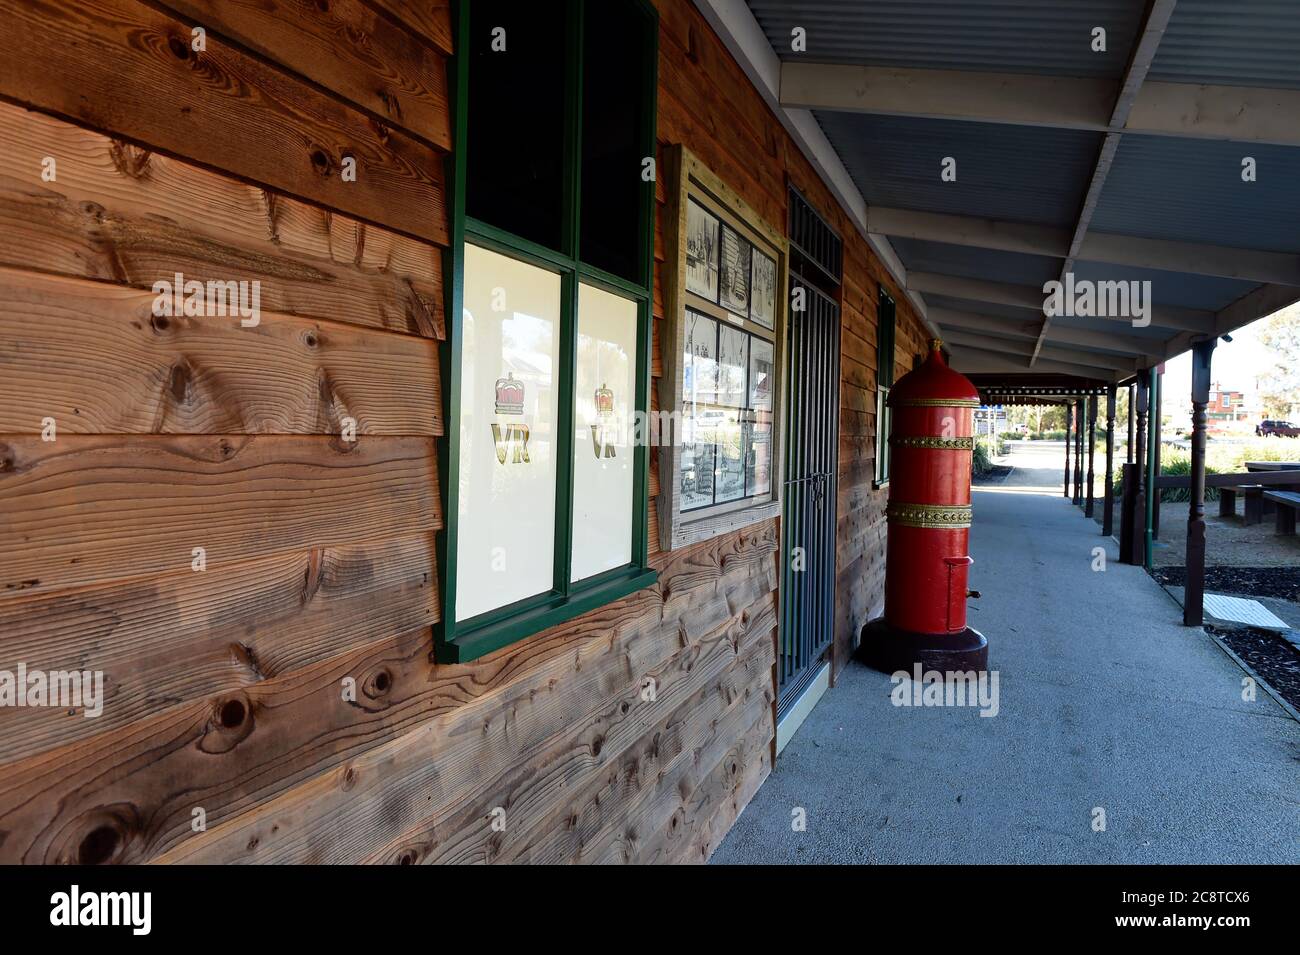 Glenrowan, Victoria. A bright red old Australian postbox stands tall outside a wooden clad building in the historical town of Glenrowan in Victoria's Stock Photo